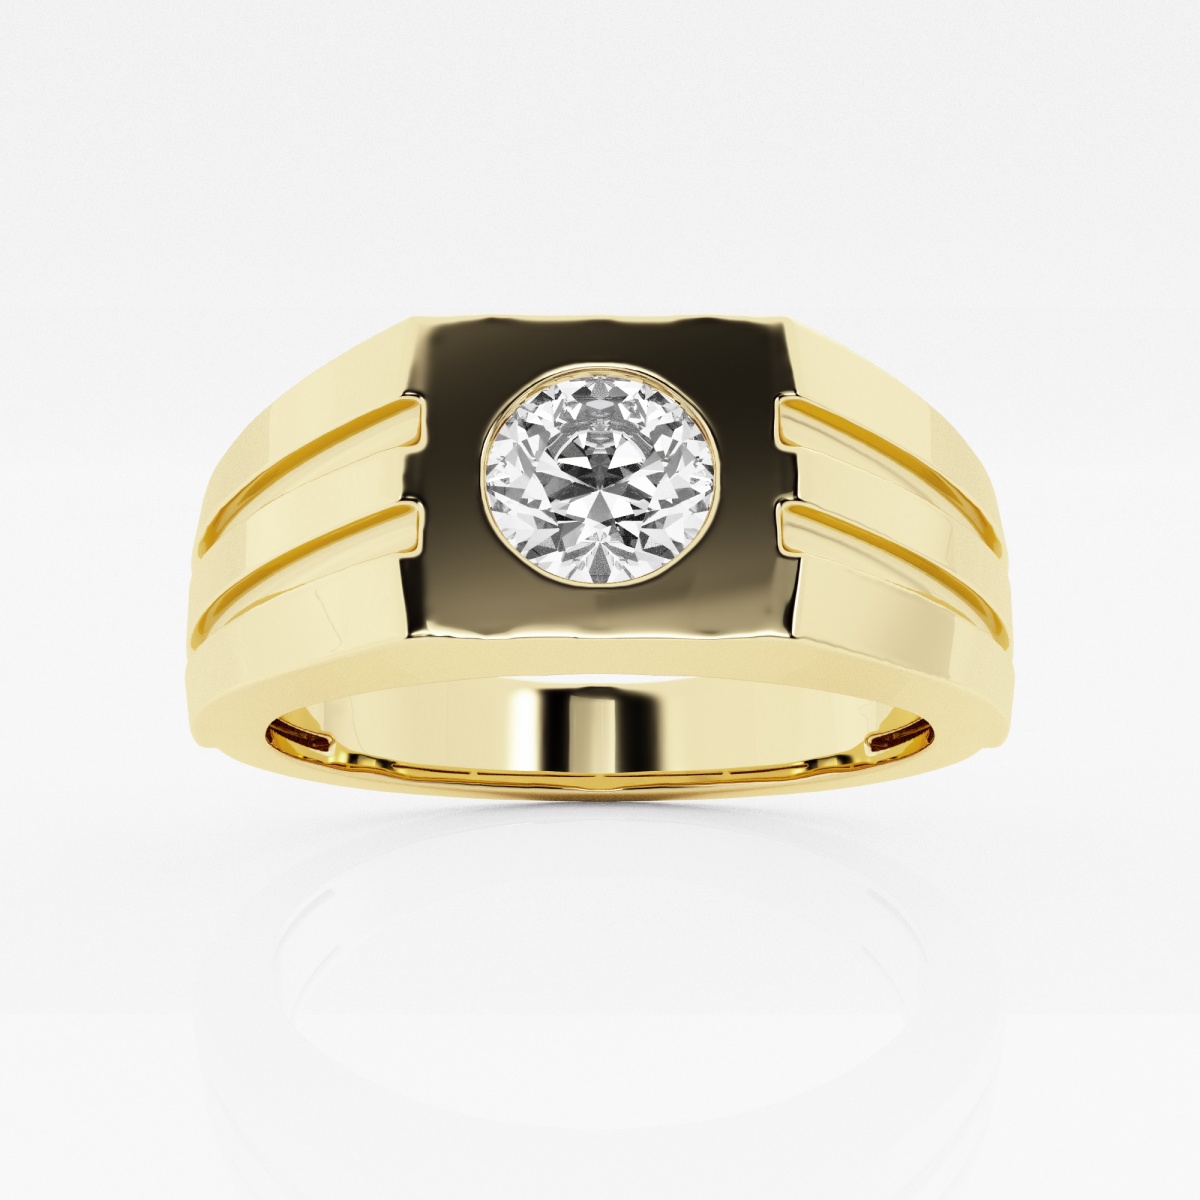 Gold Rings  Lab-Grown Diamond Rings With Gold